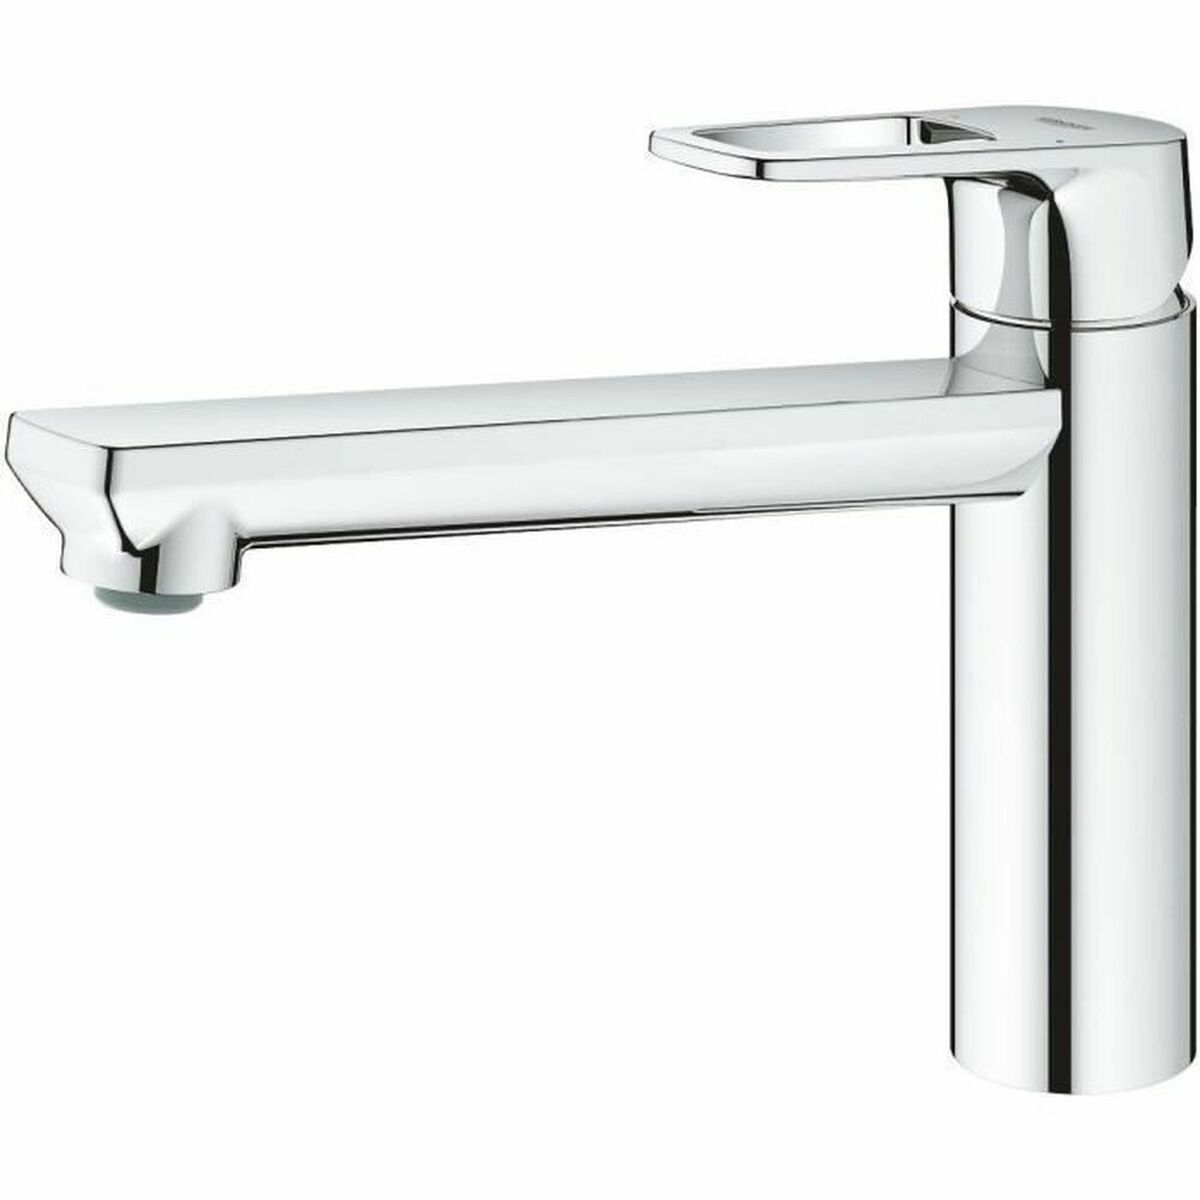 Mixer Tap Grohe 31706000